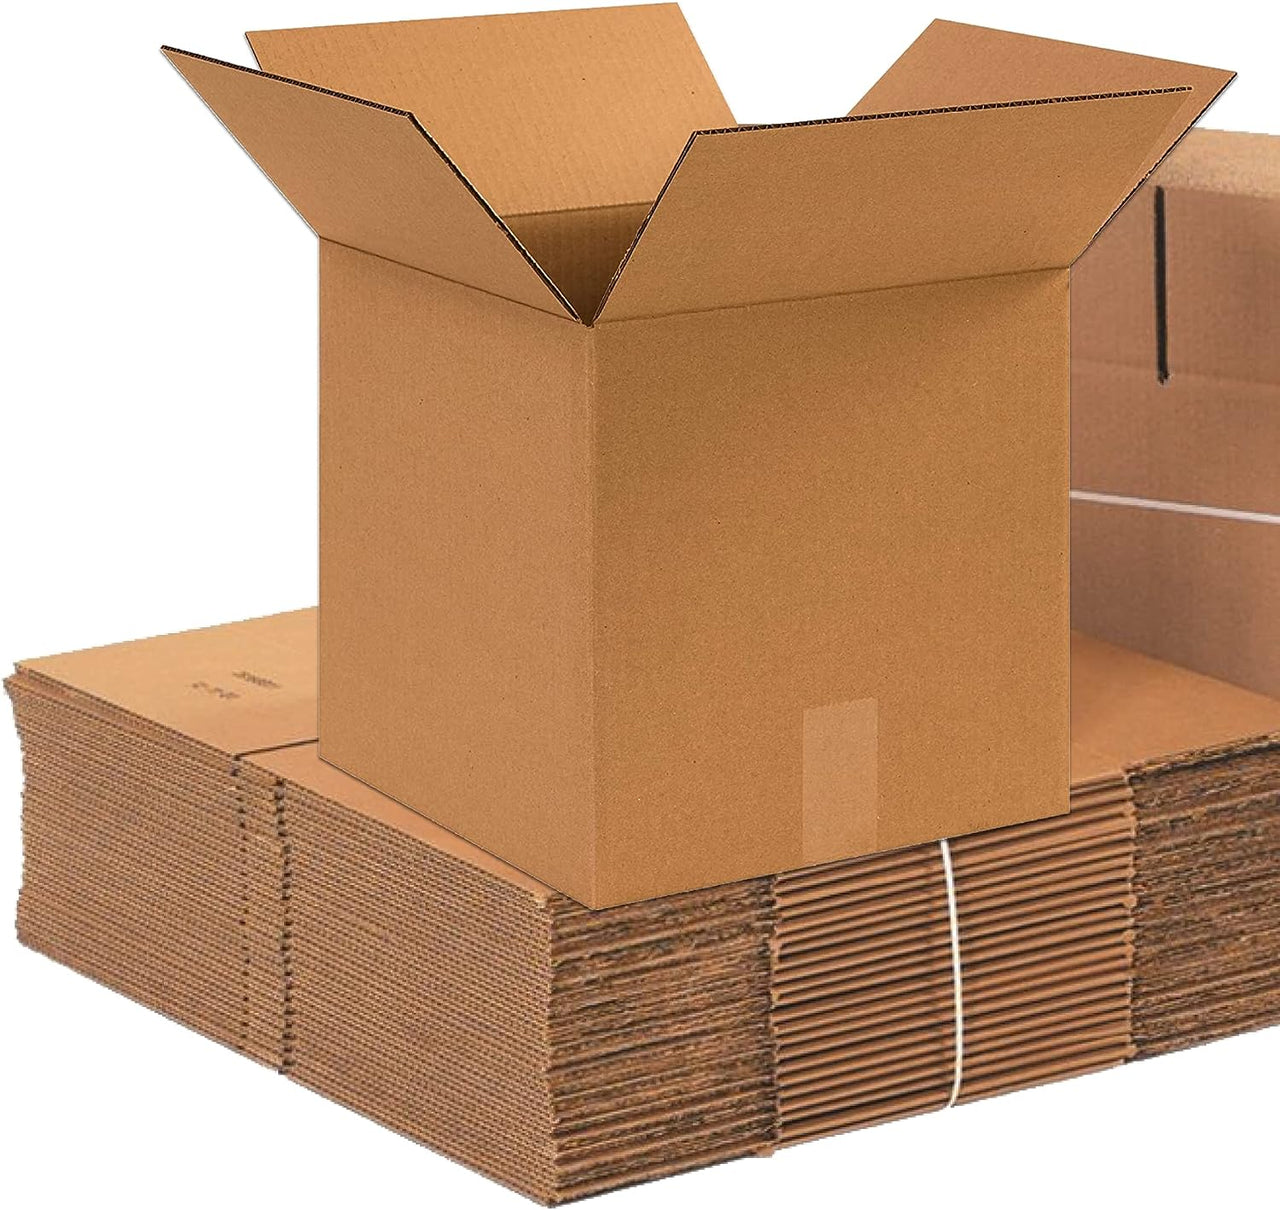 Shipping Boxes 14"L x 14"W x 14"H 50-Pack Corrugated Cardboard Box for Packing Moving Storage